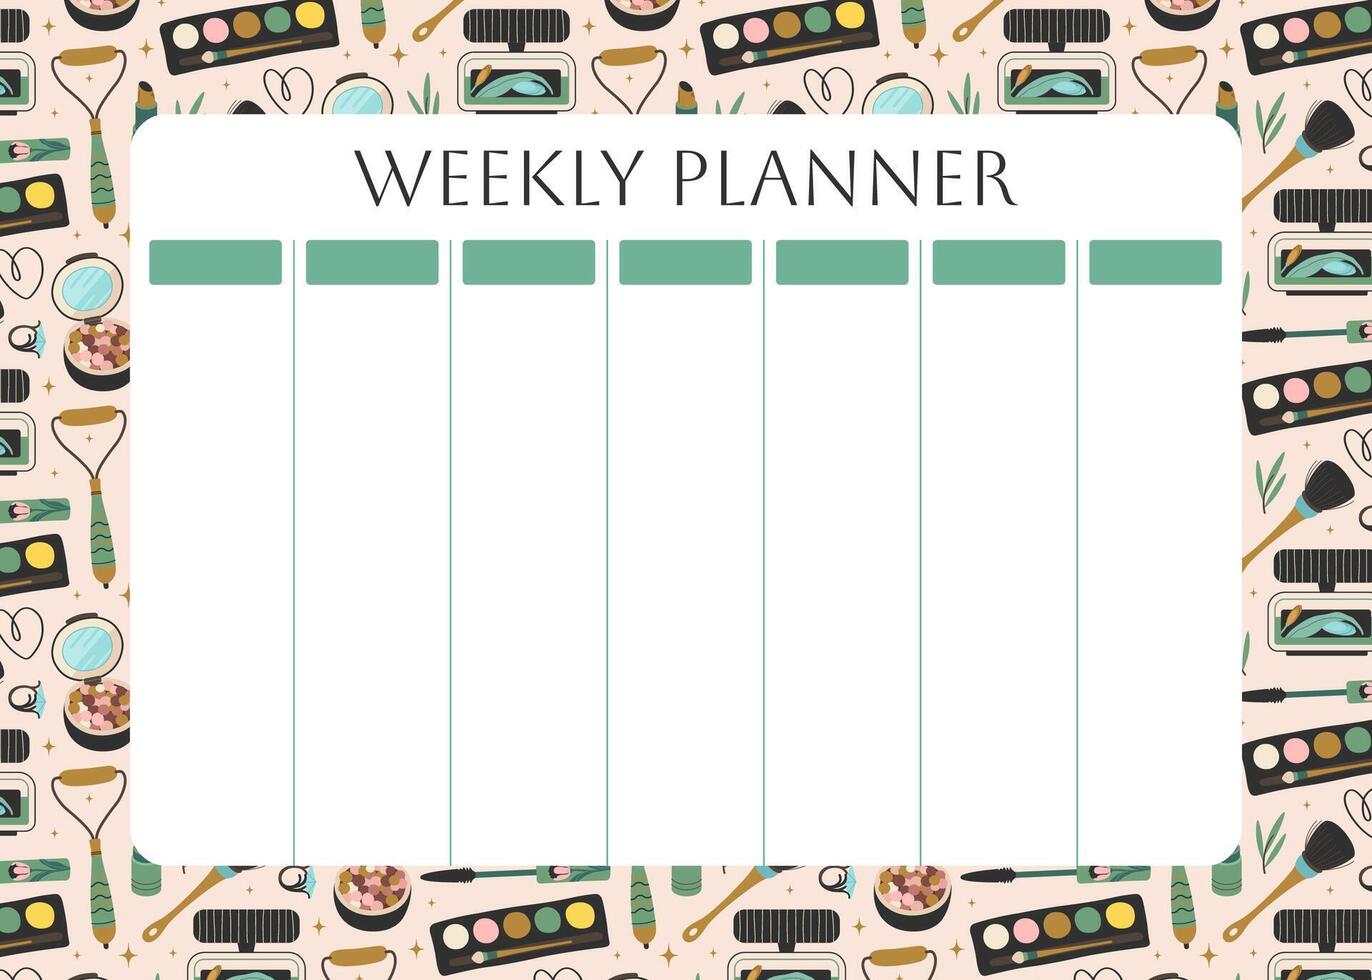 Weekly planner with fashion womens accessories. Beauty and makeup icons backgrounds for notes. Body care products. Cute lifestyle planner is for 7 days. Schedule design template. Vector illustration.